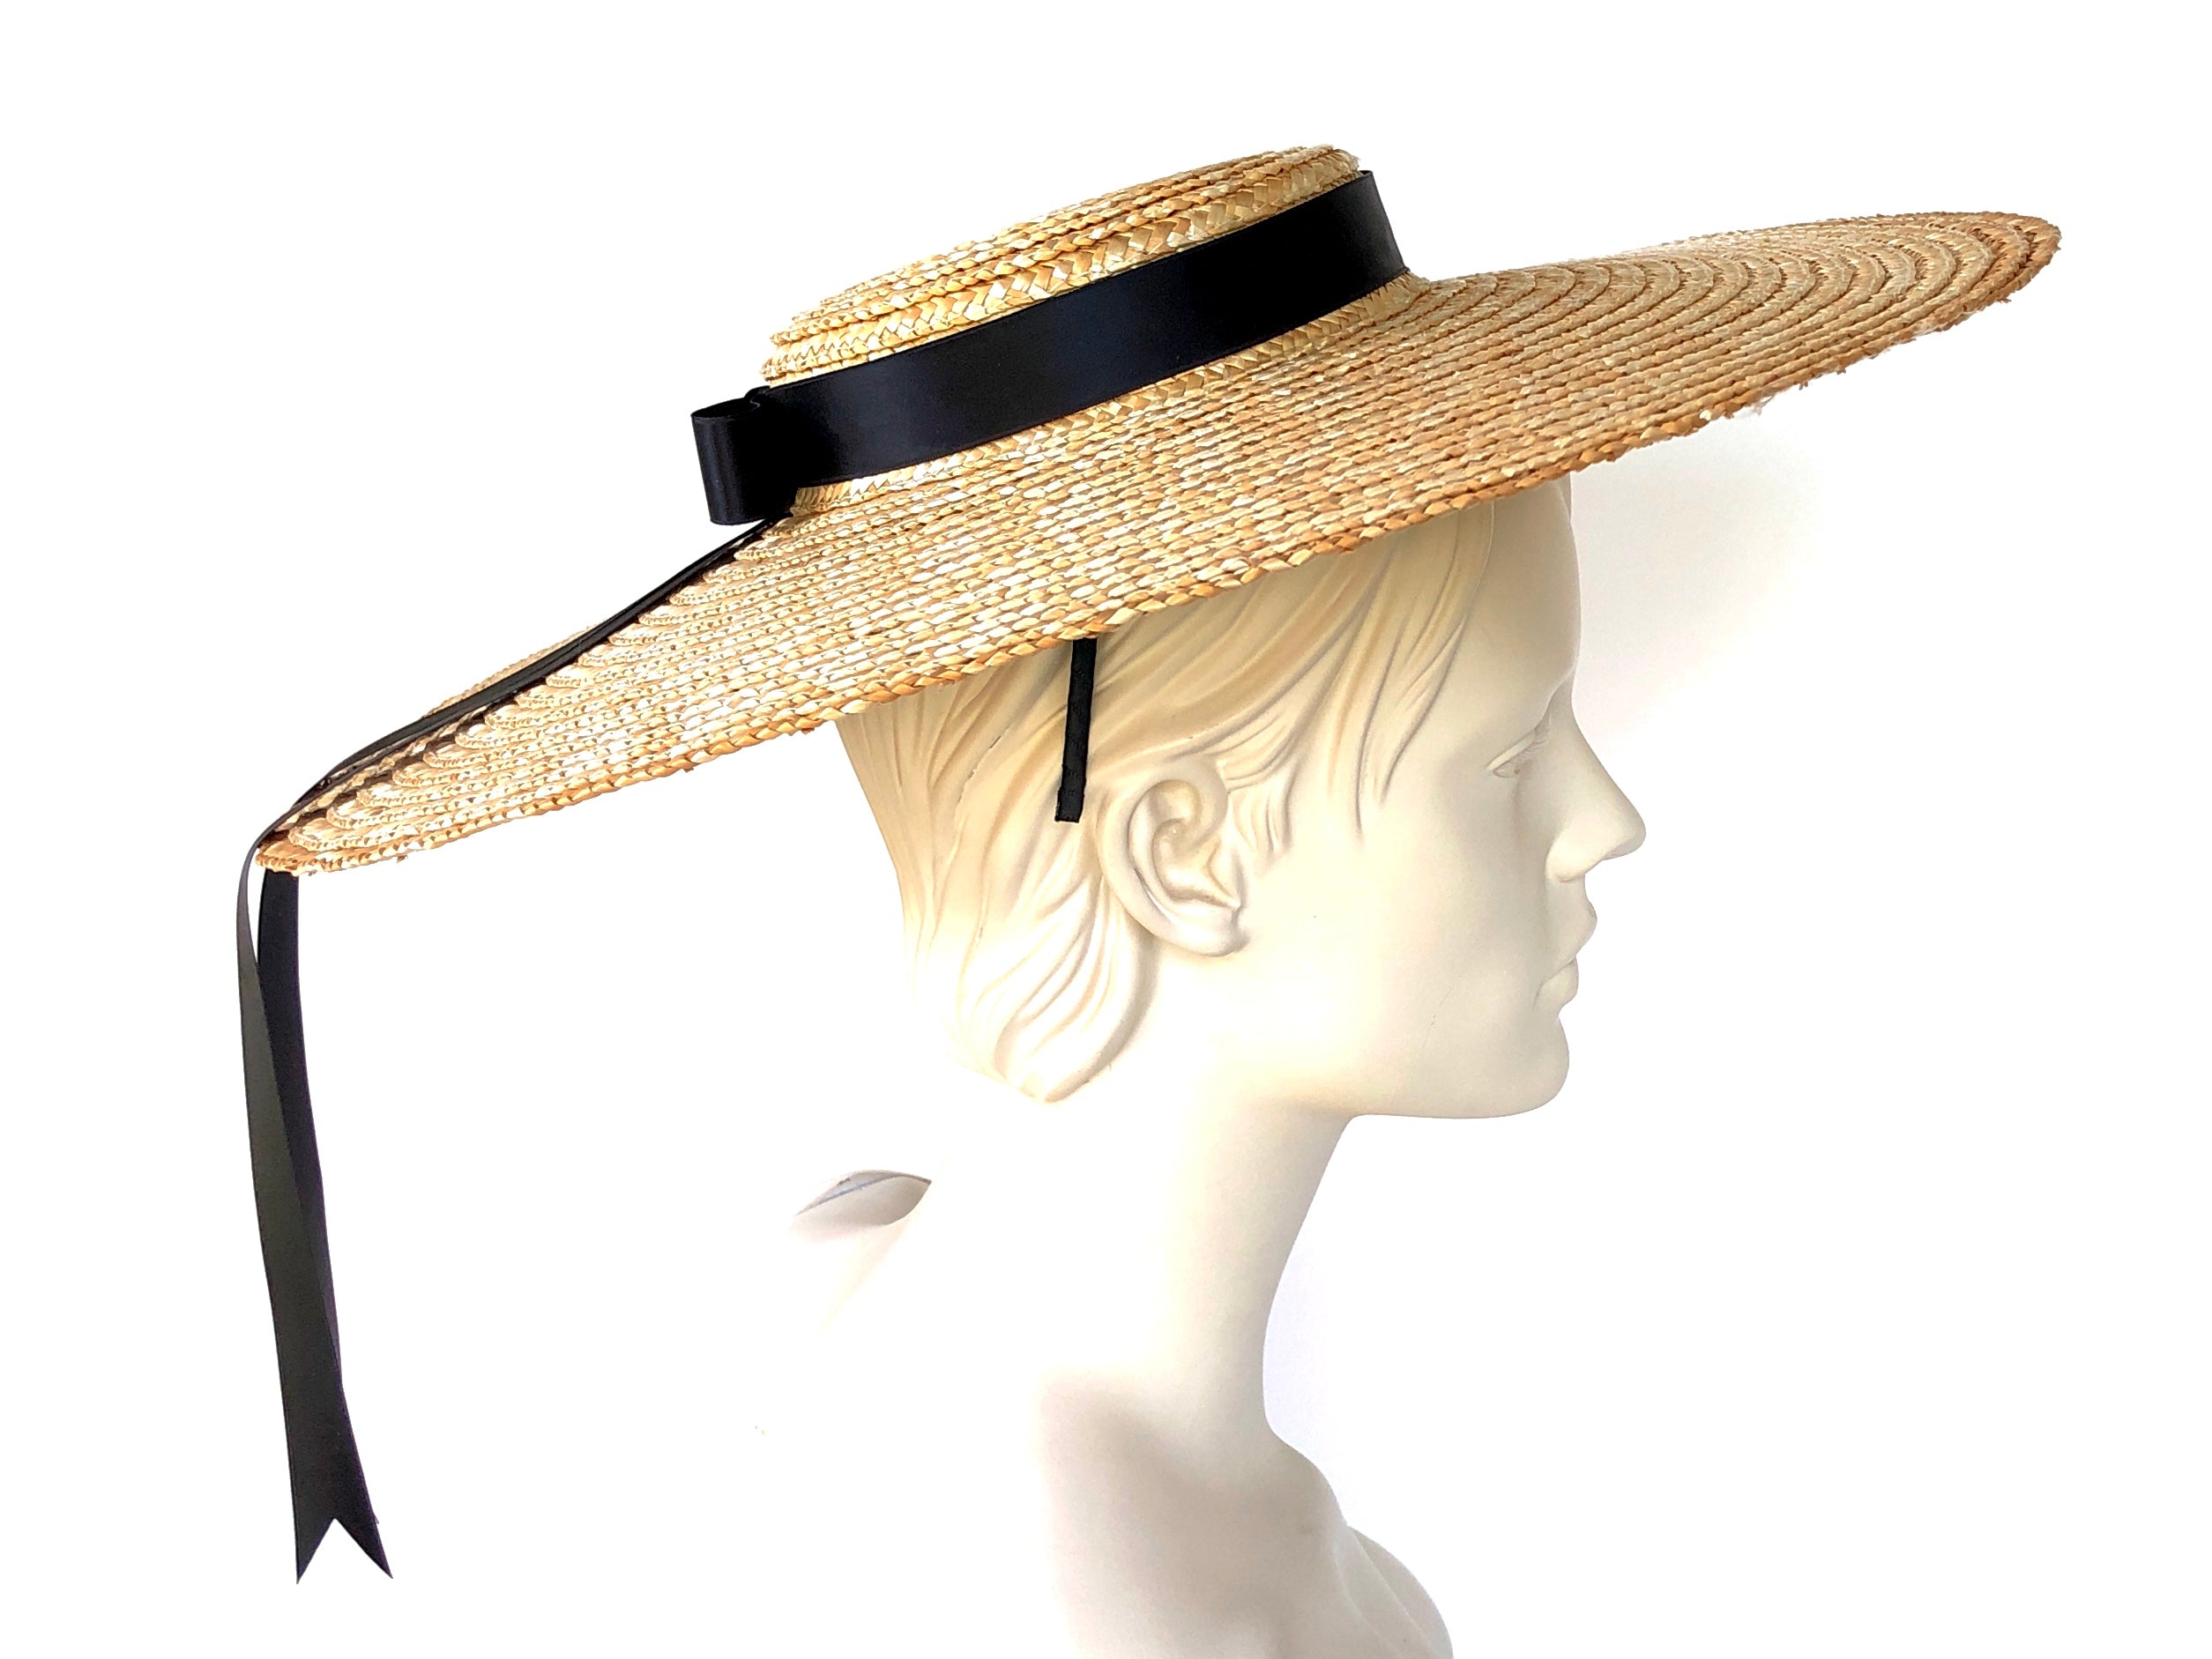 STRAW HAT - FRENCH BÉRGERE VINTAGE STYLE SUMMER HAT WITH A WIDE BRIM AND A BOW